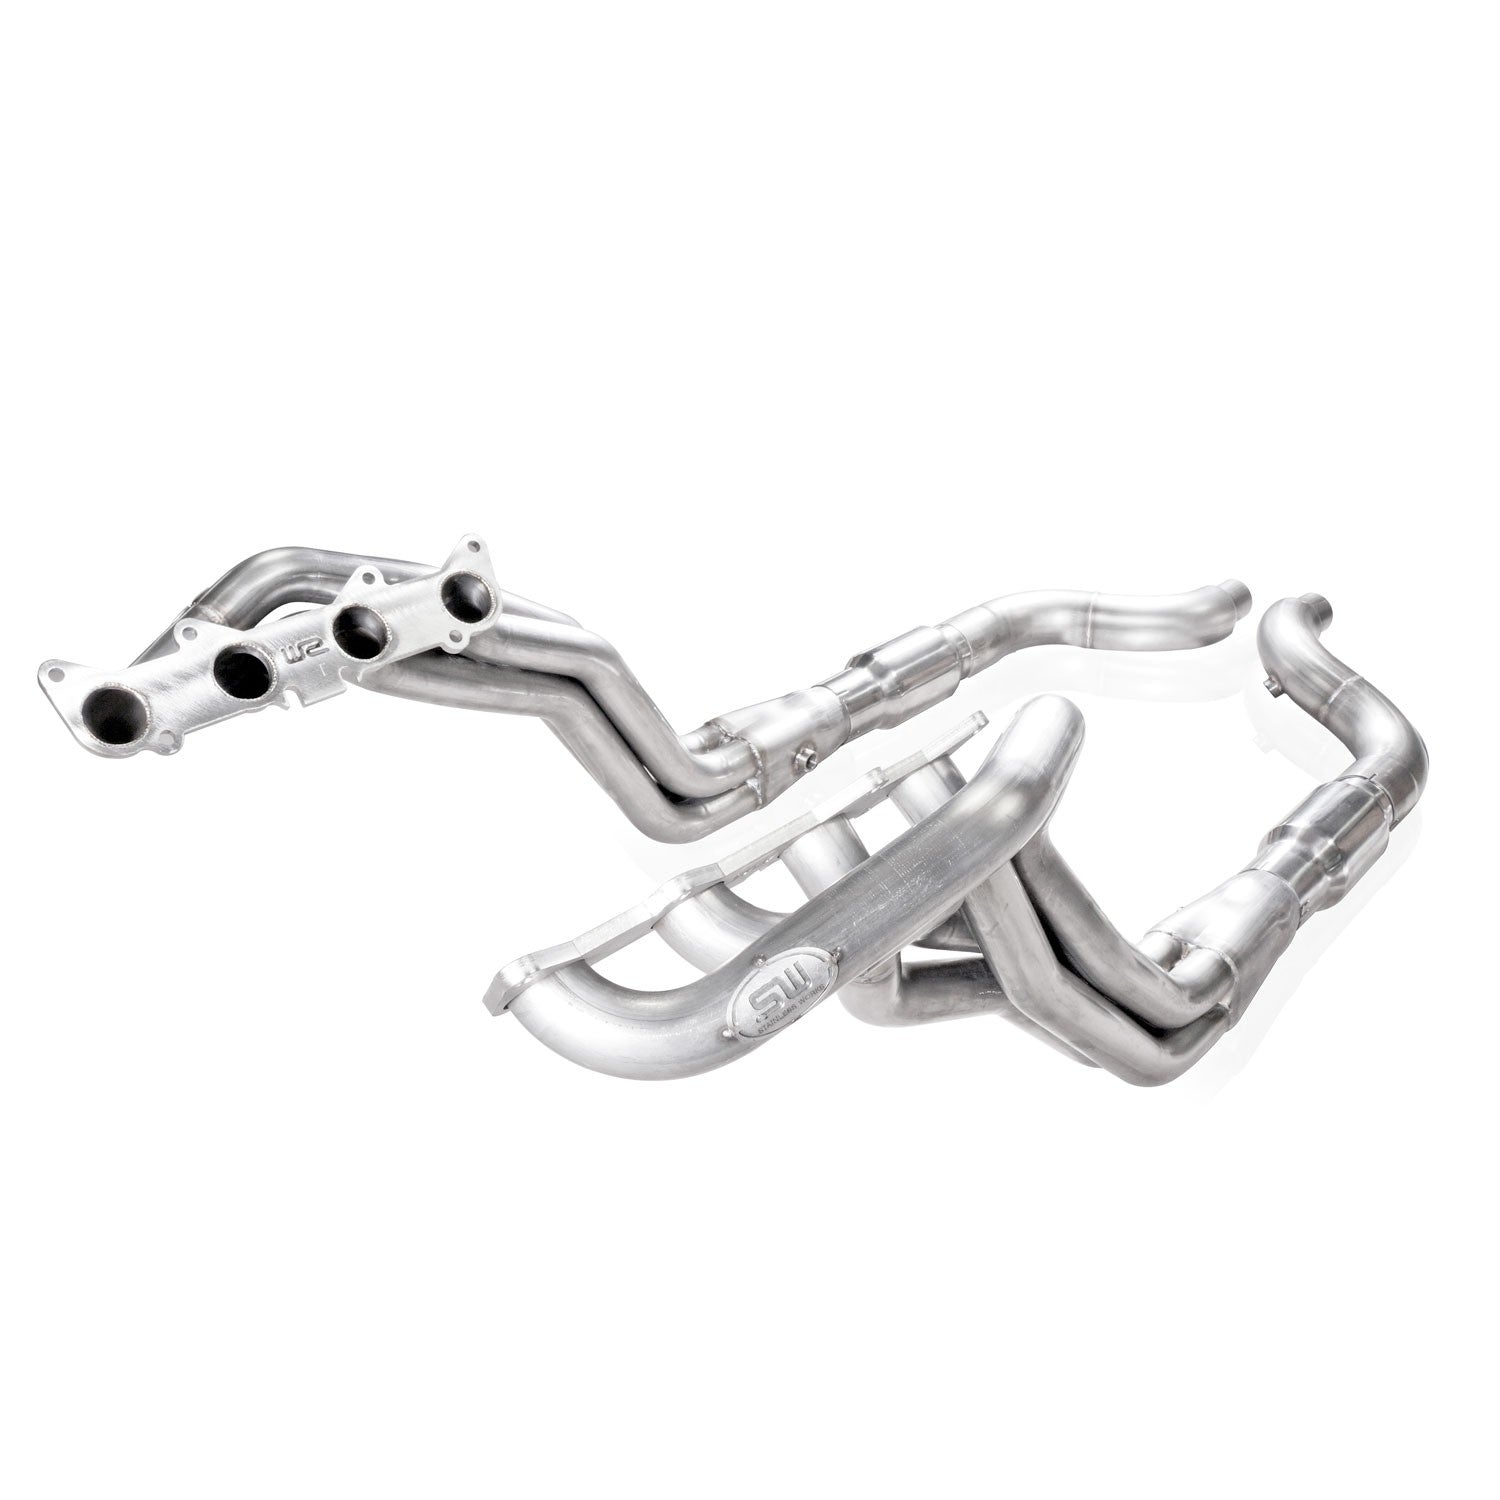 Stainless Works Ford Mustang GT 2015-17 Headers 1-7/8" Catted Factory Connect M15HCAT